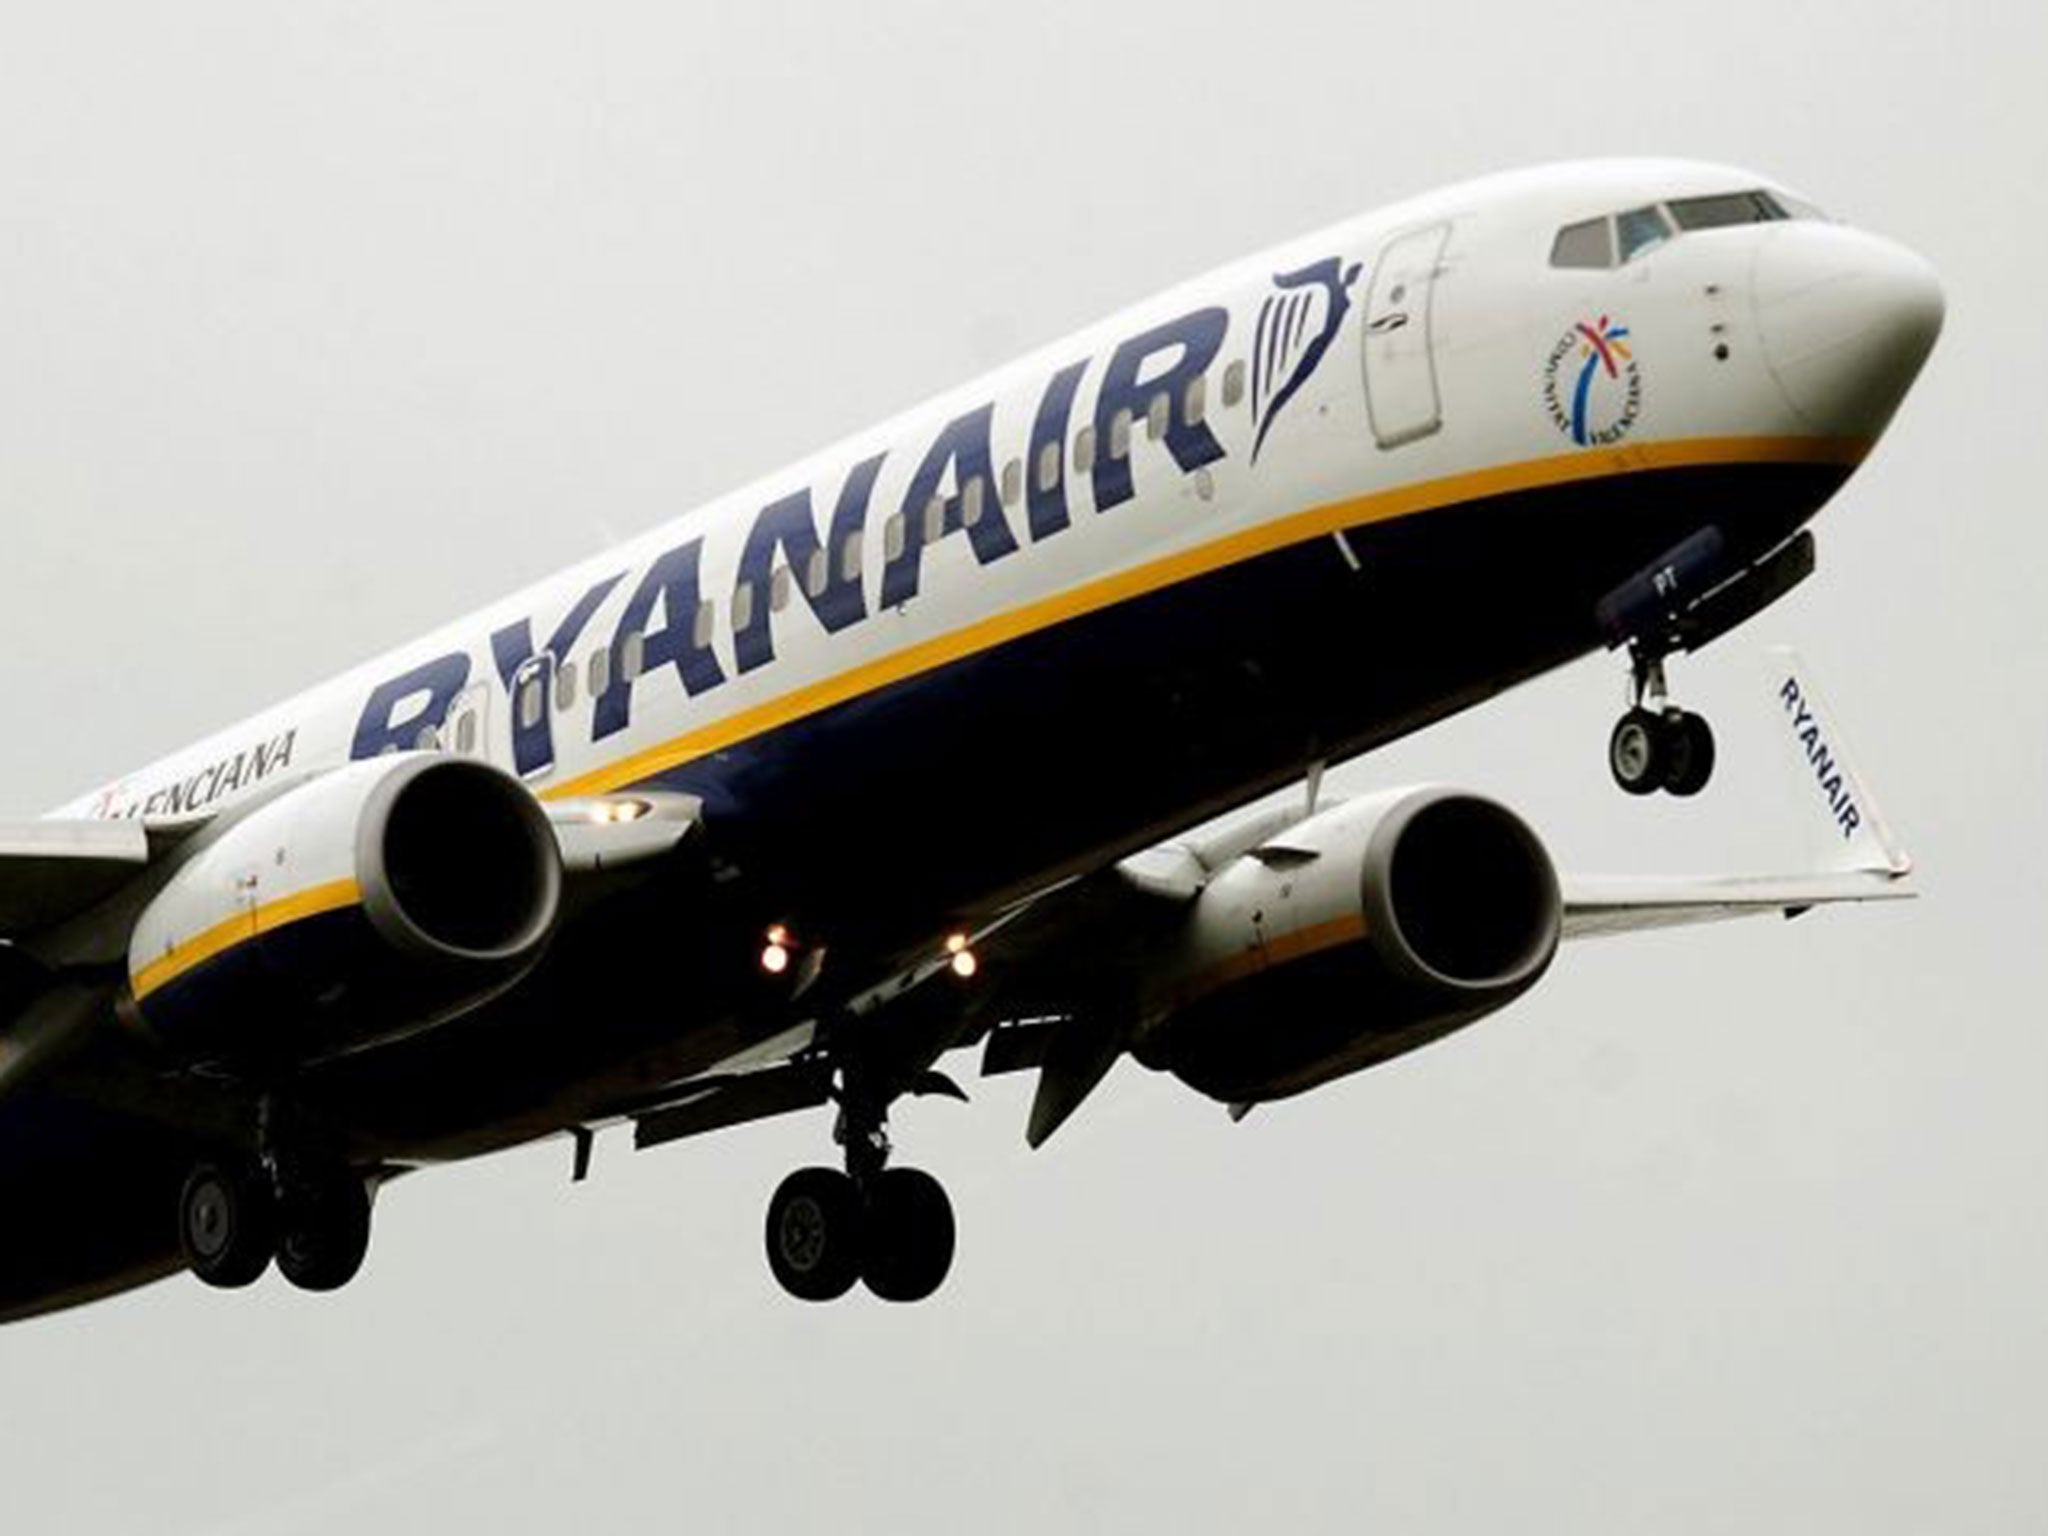 Ryanair: Pay for seats?